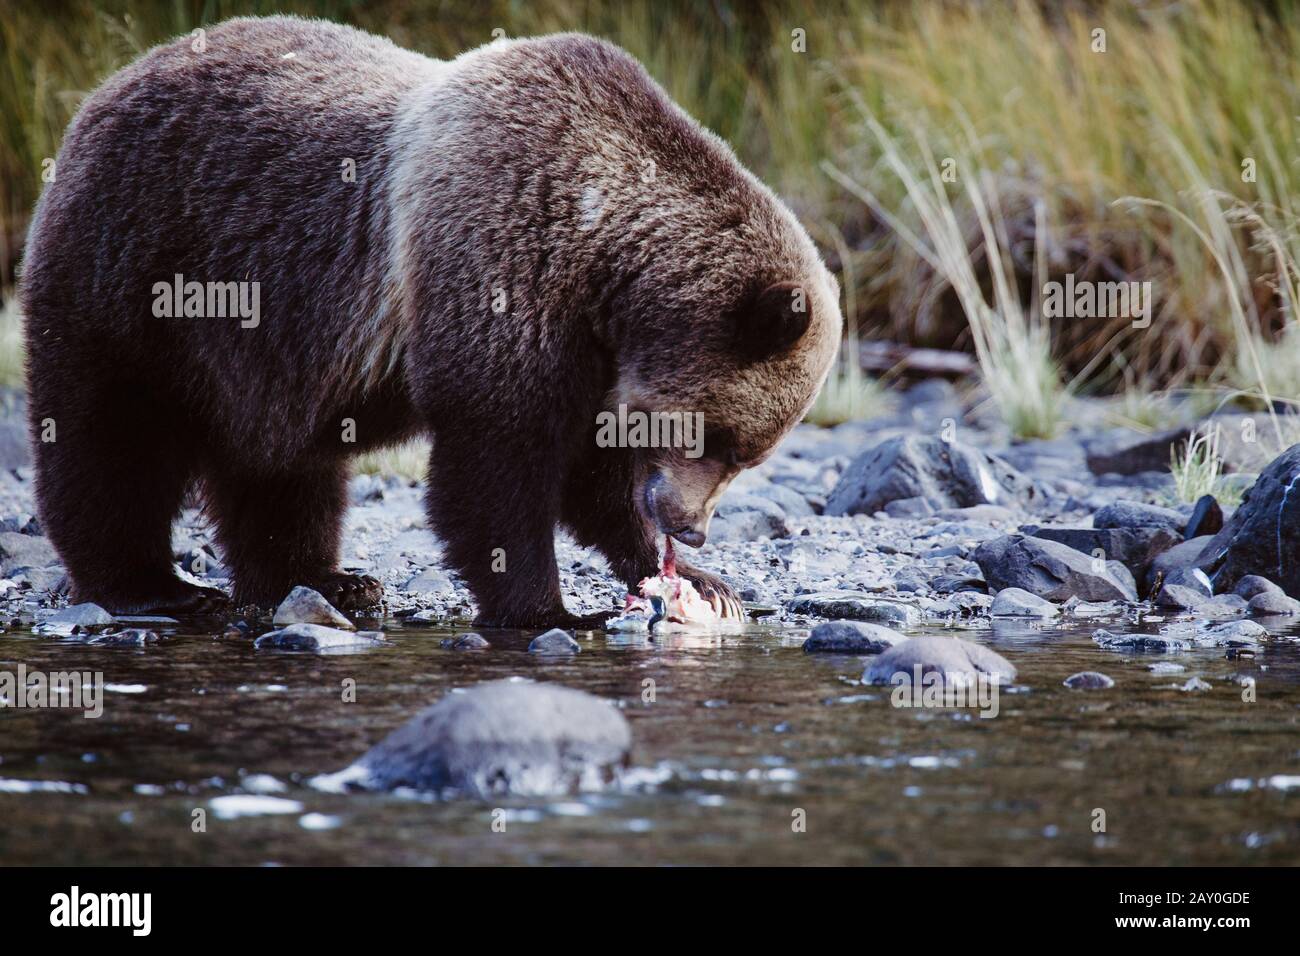 Grizzly bear eating a fish, Chilko Lake, British Columbia, Canada Stock Photo